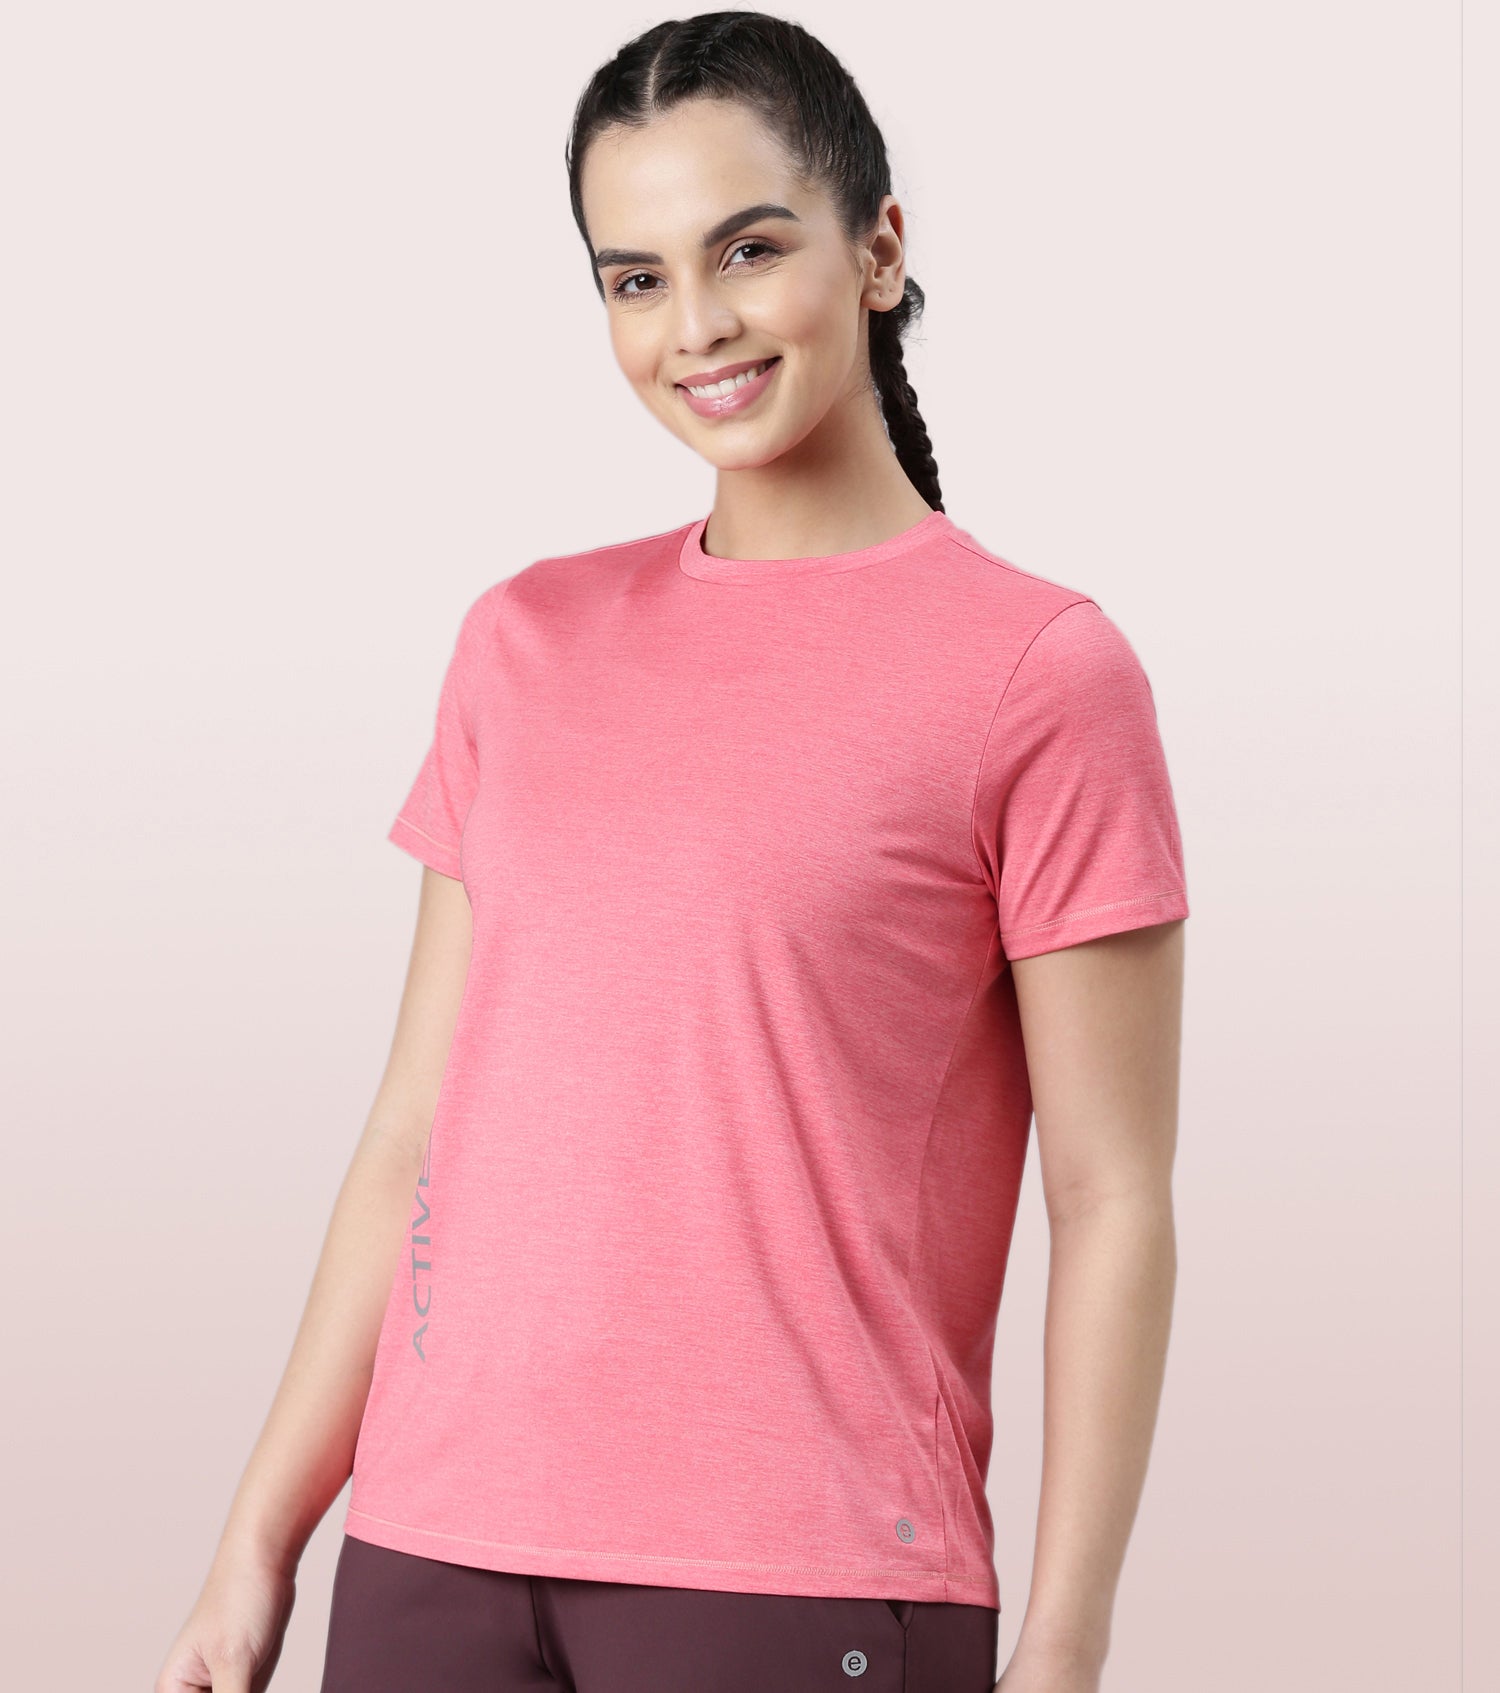 Basic Workout Crew Tee | Dry Fit Crew Neck Activewear Tee Relaxed Fit | Regular Length | A309